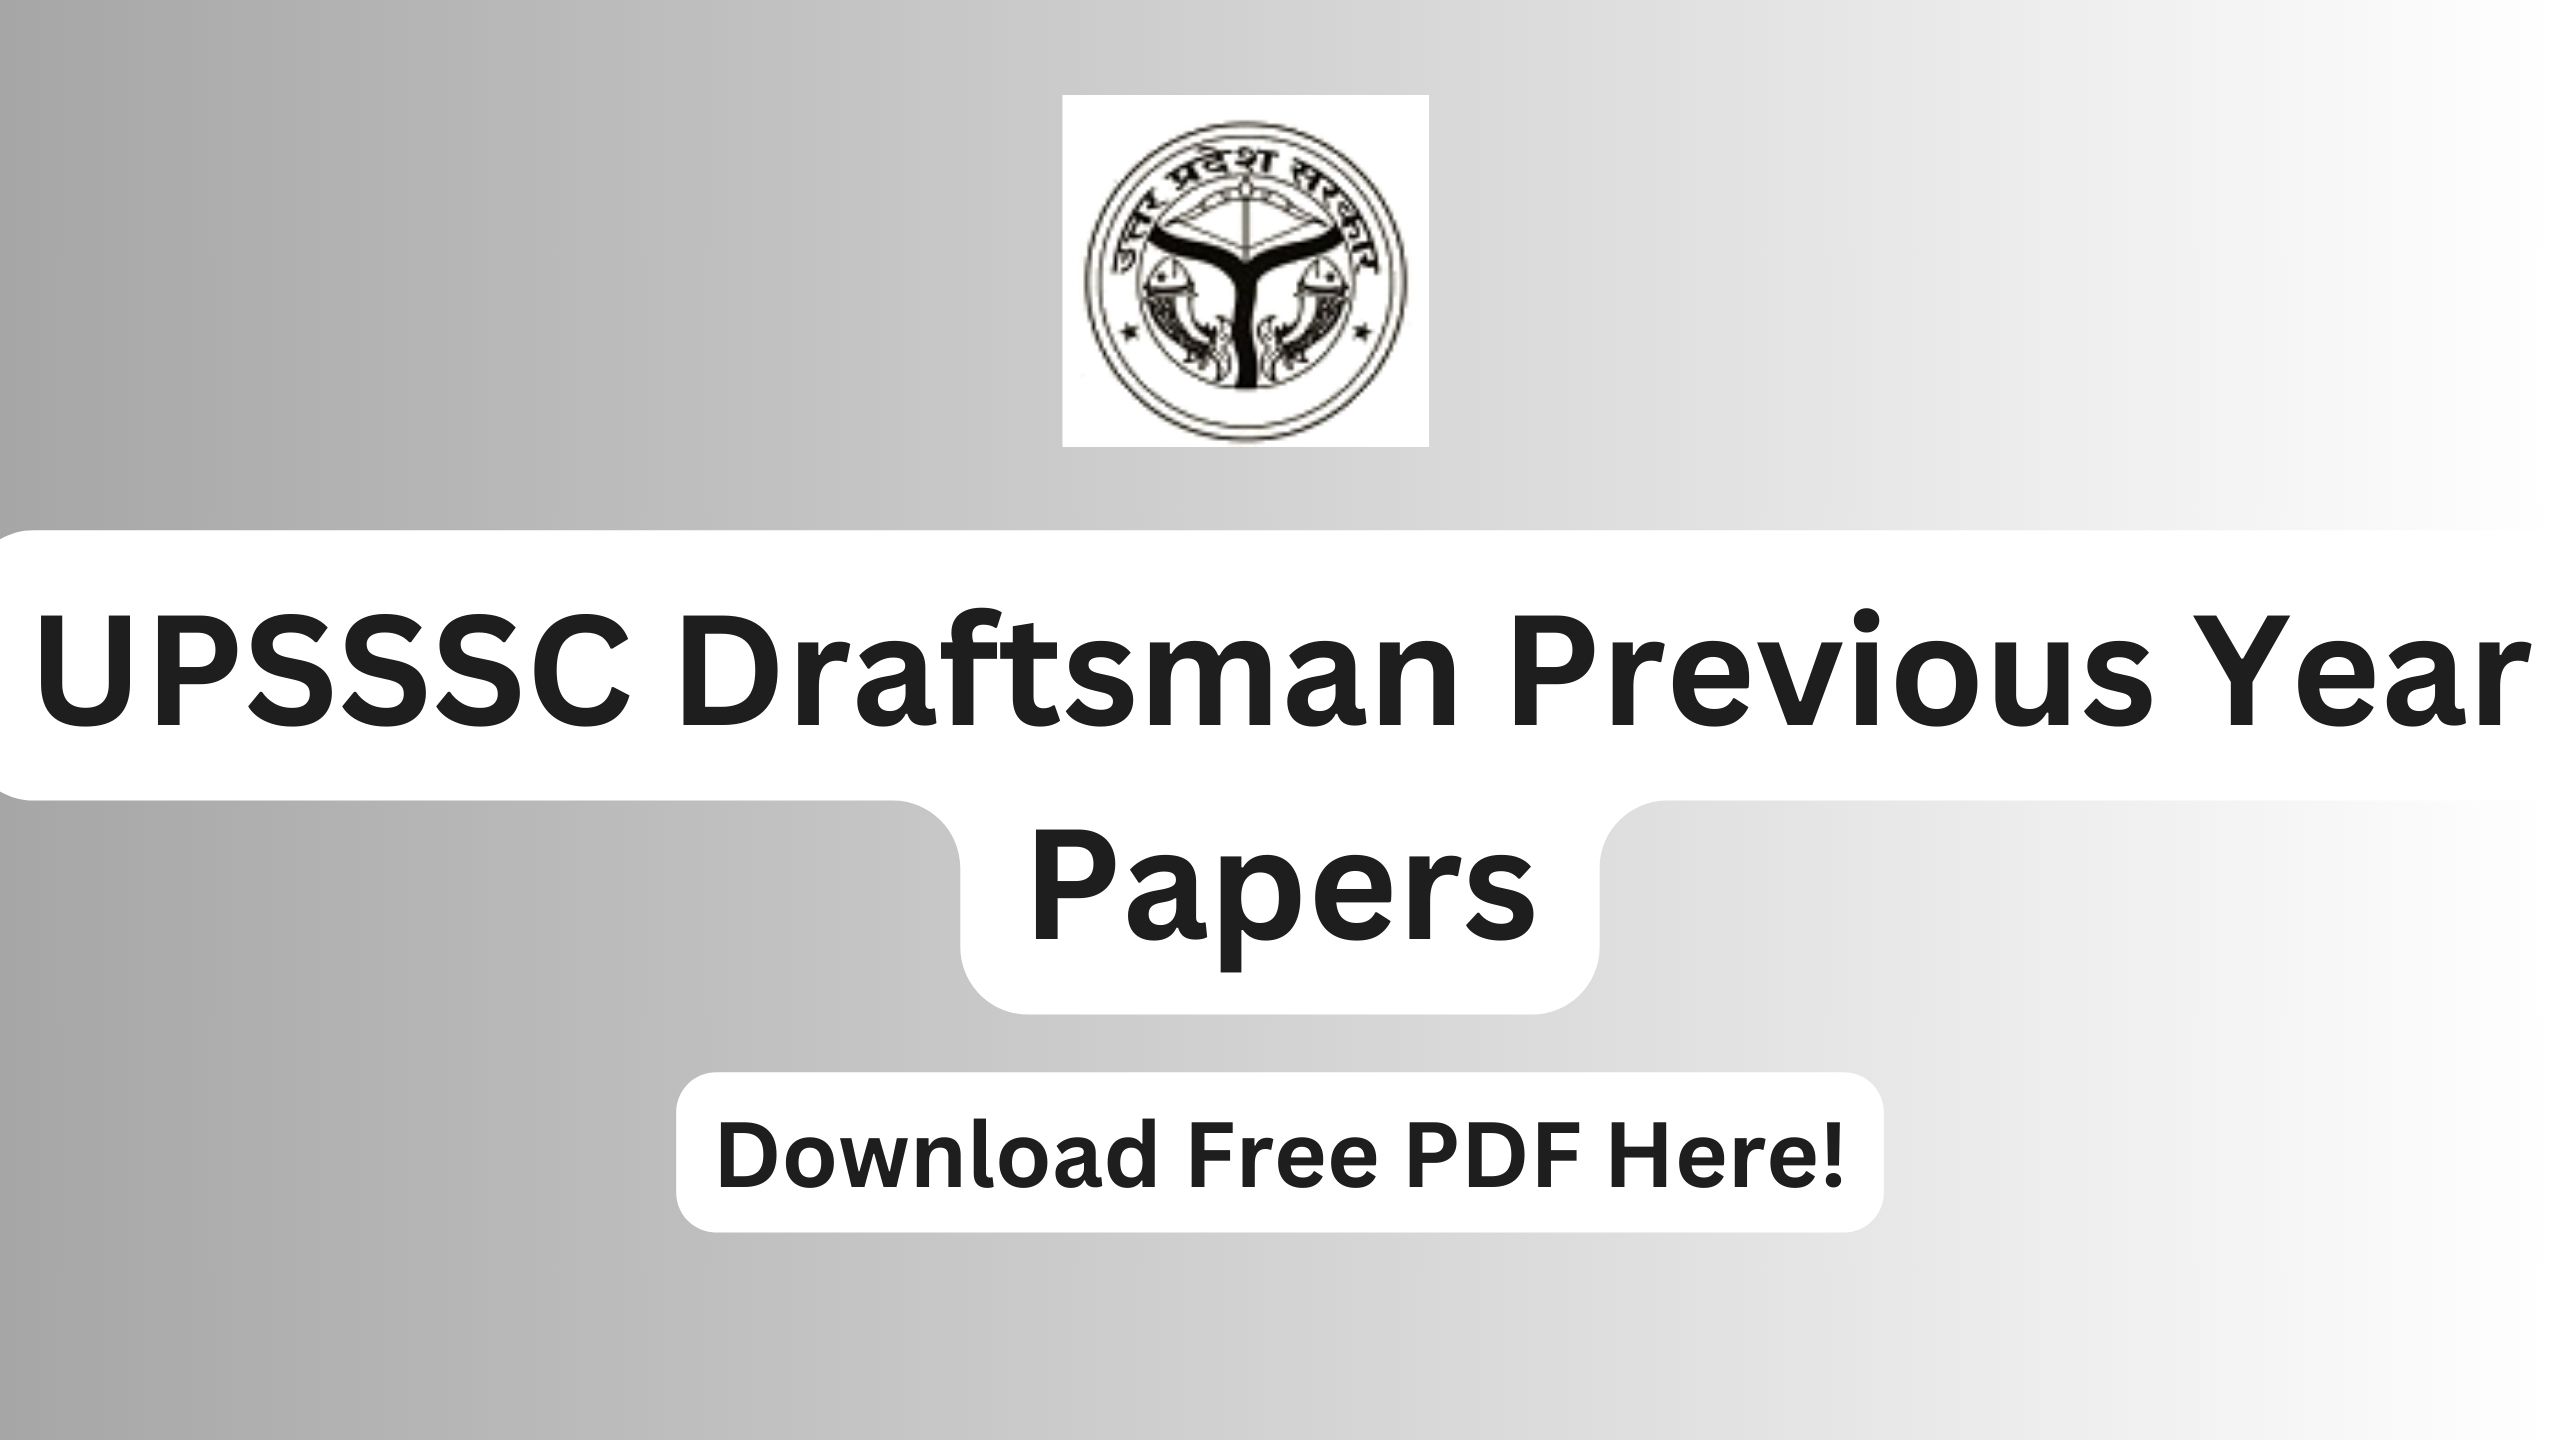 UPSSSC Draftsman Previous Year Papers